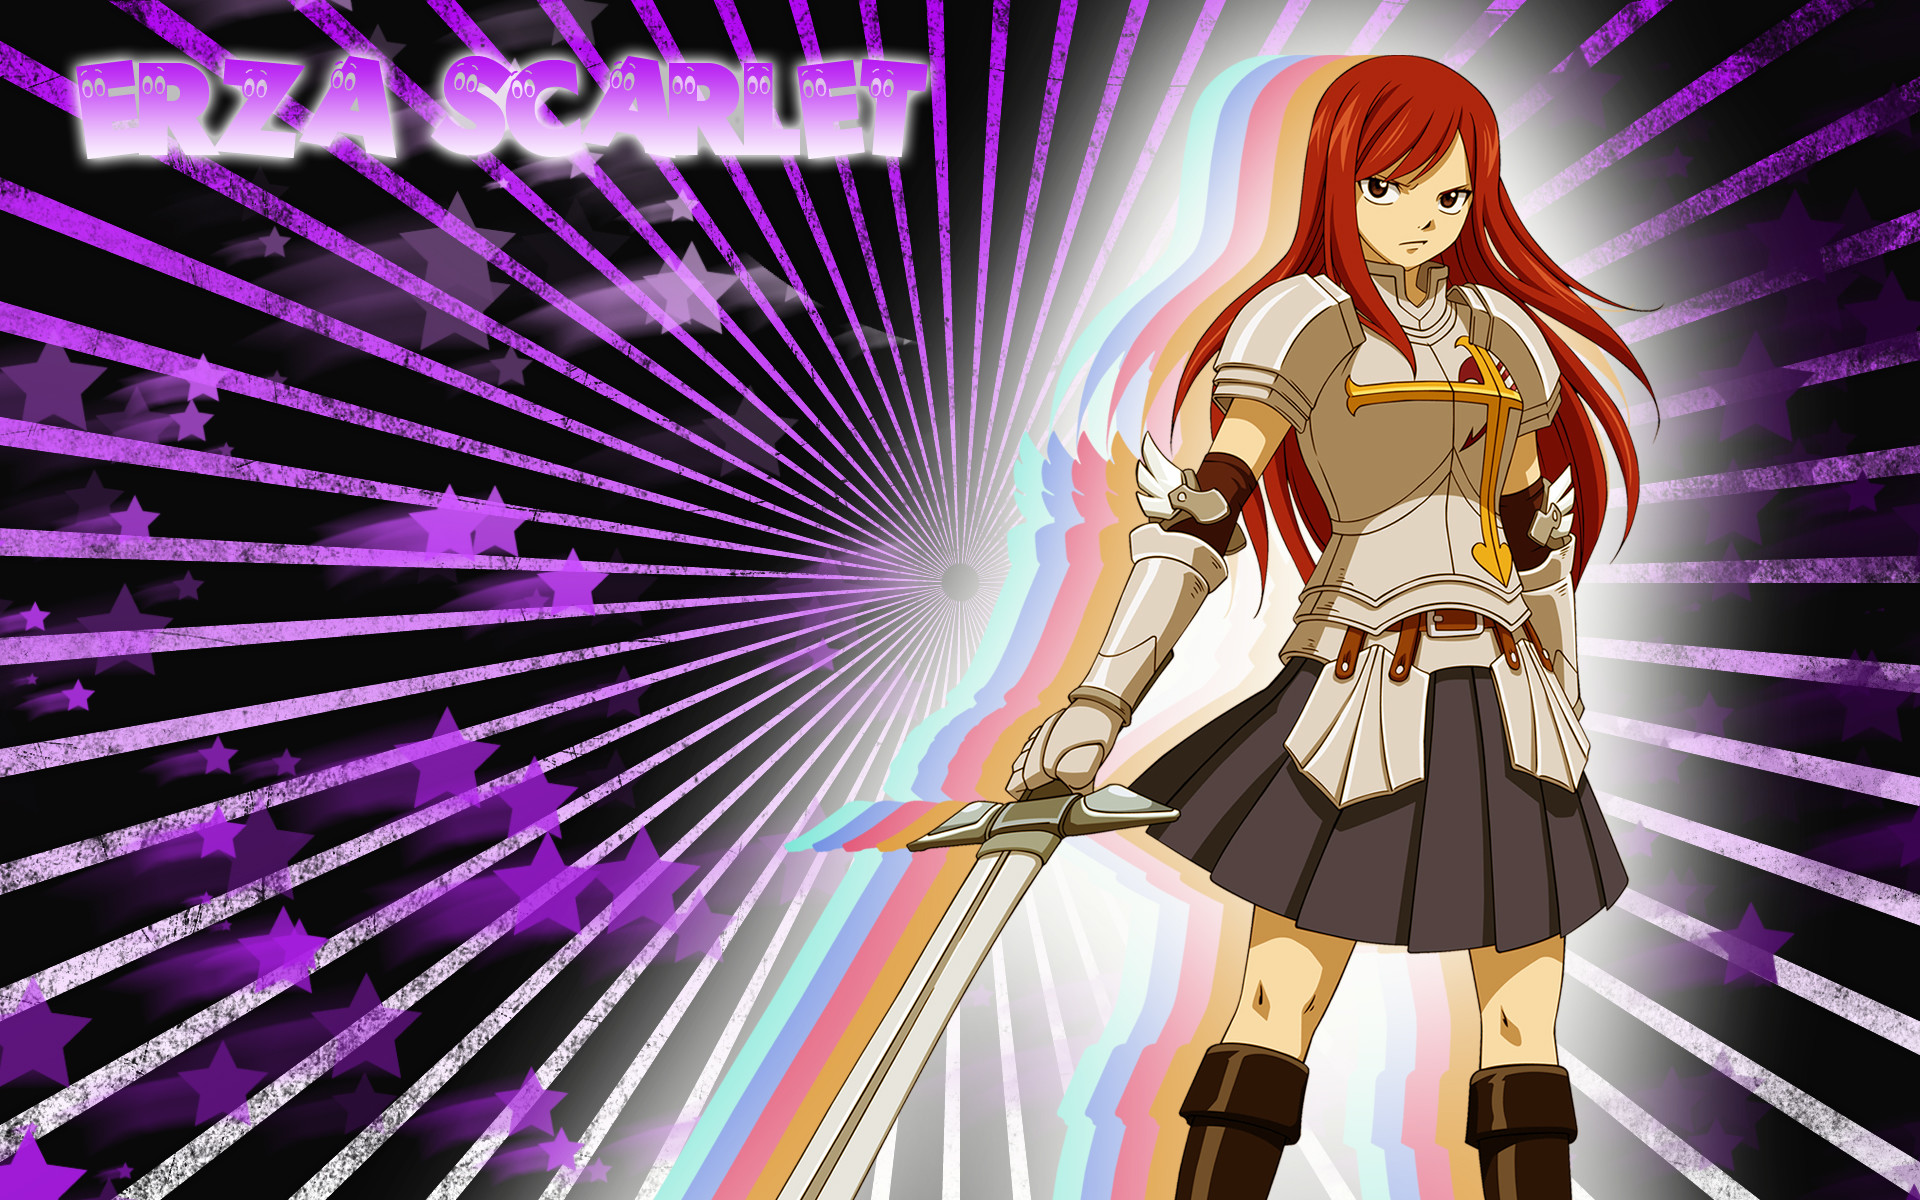 1920x1200 Erza and Lucy images erza scarlet HD wallpaper and background photos